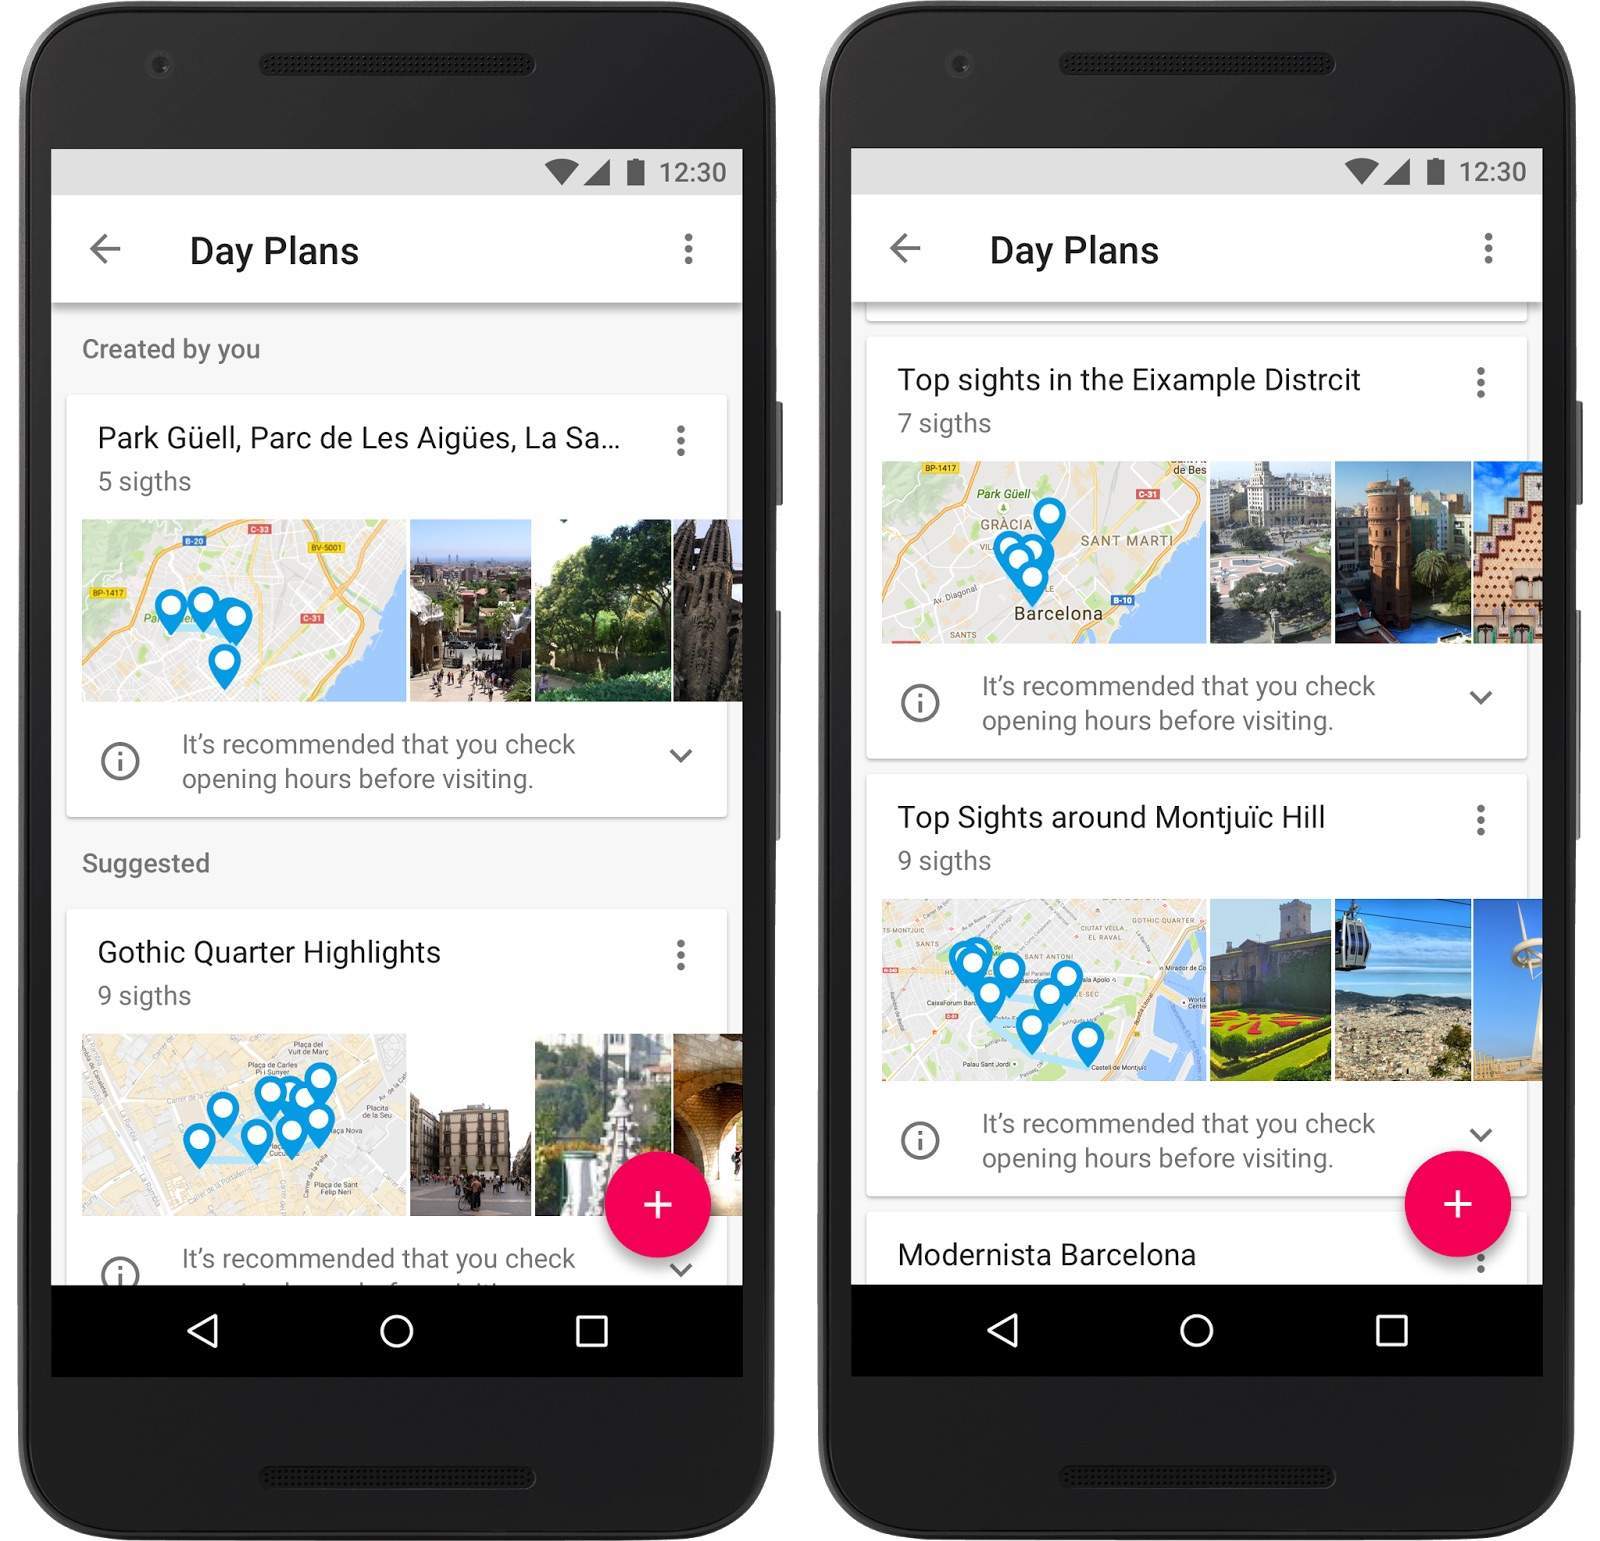 Google Trips puts travel guide for 200 cities in your pocket.